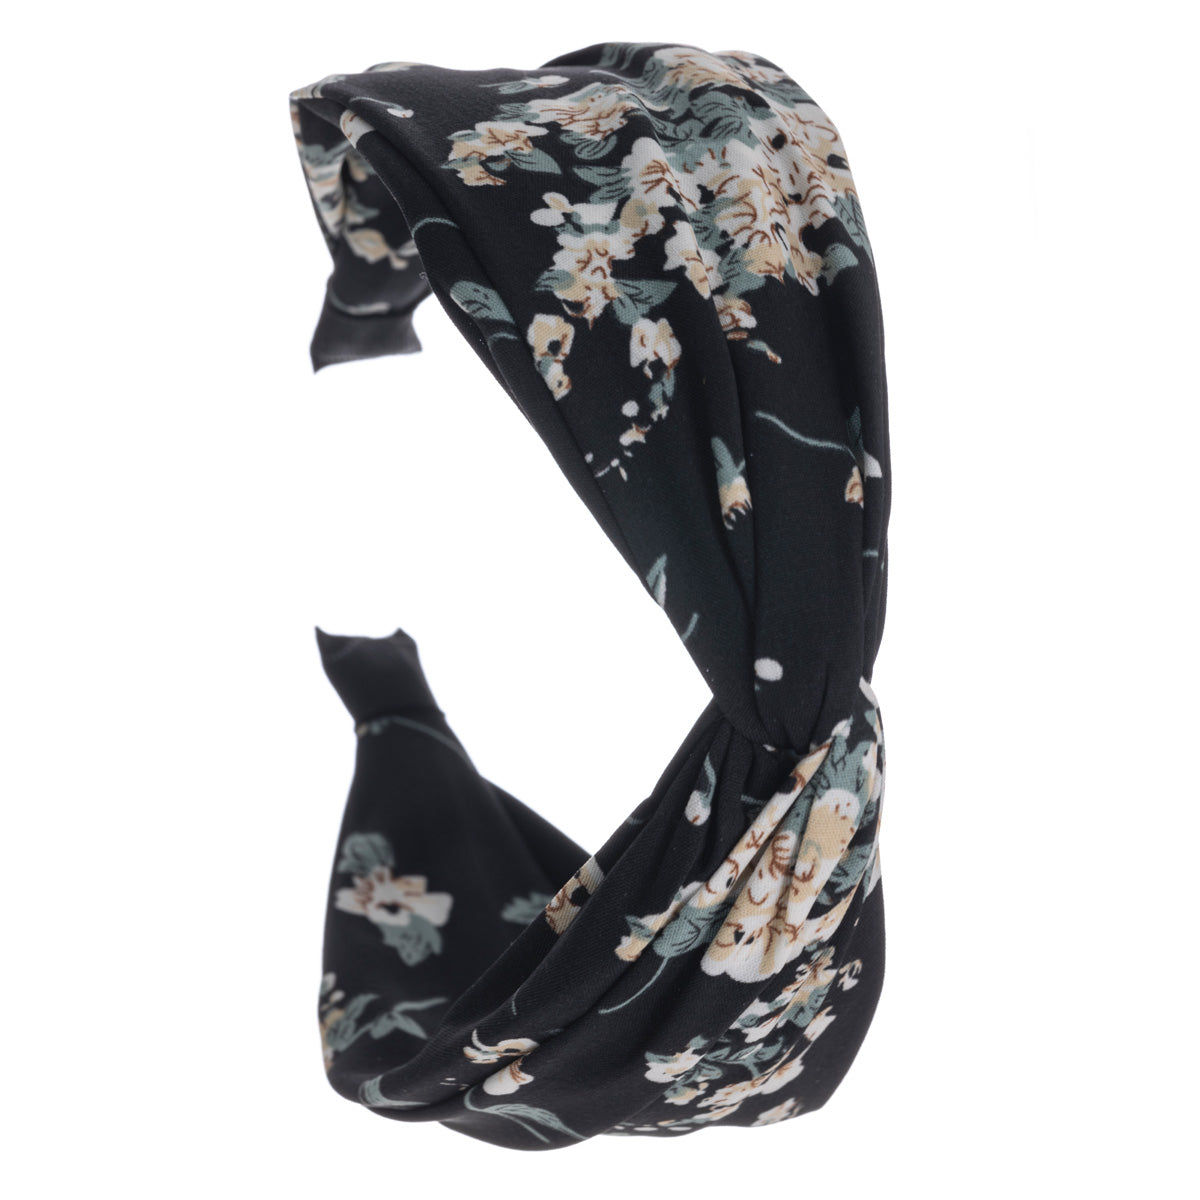 A flower patterned wide hair collar